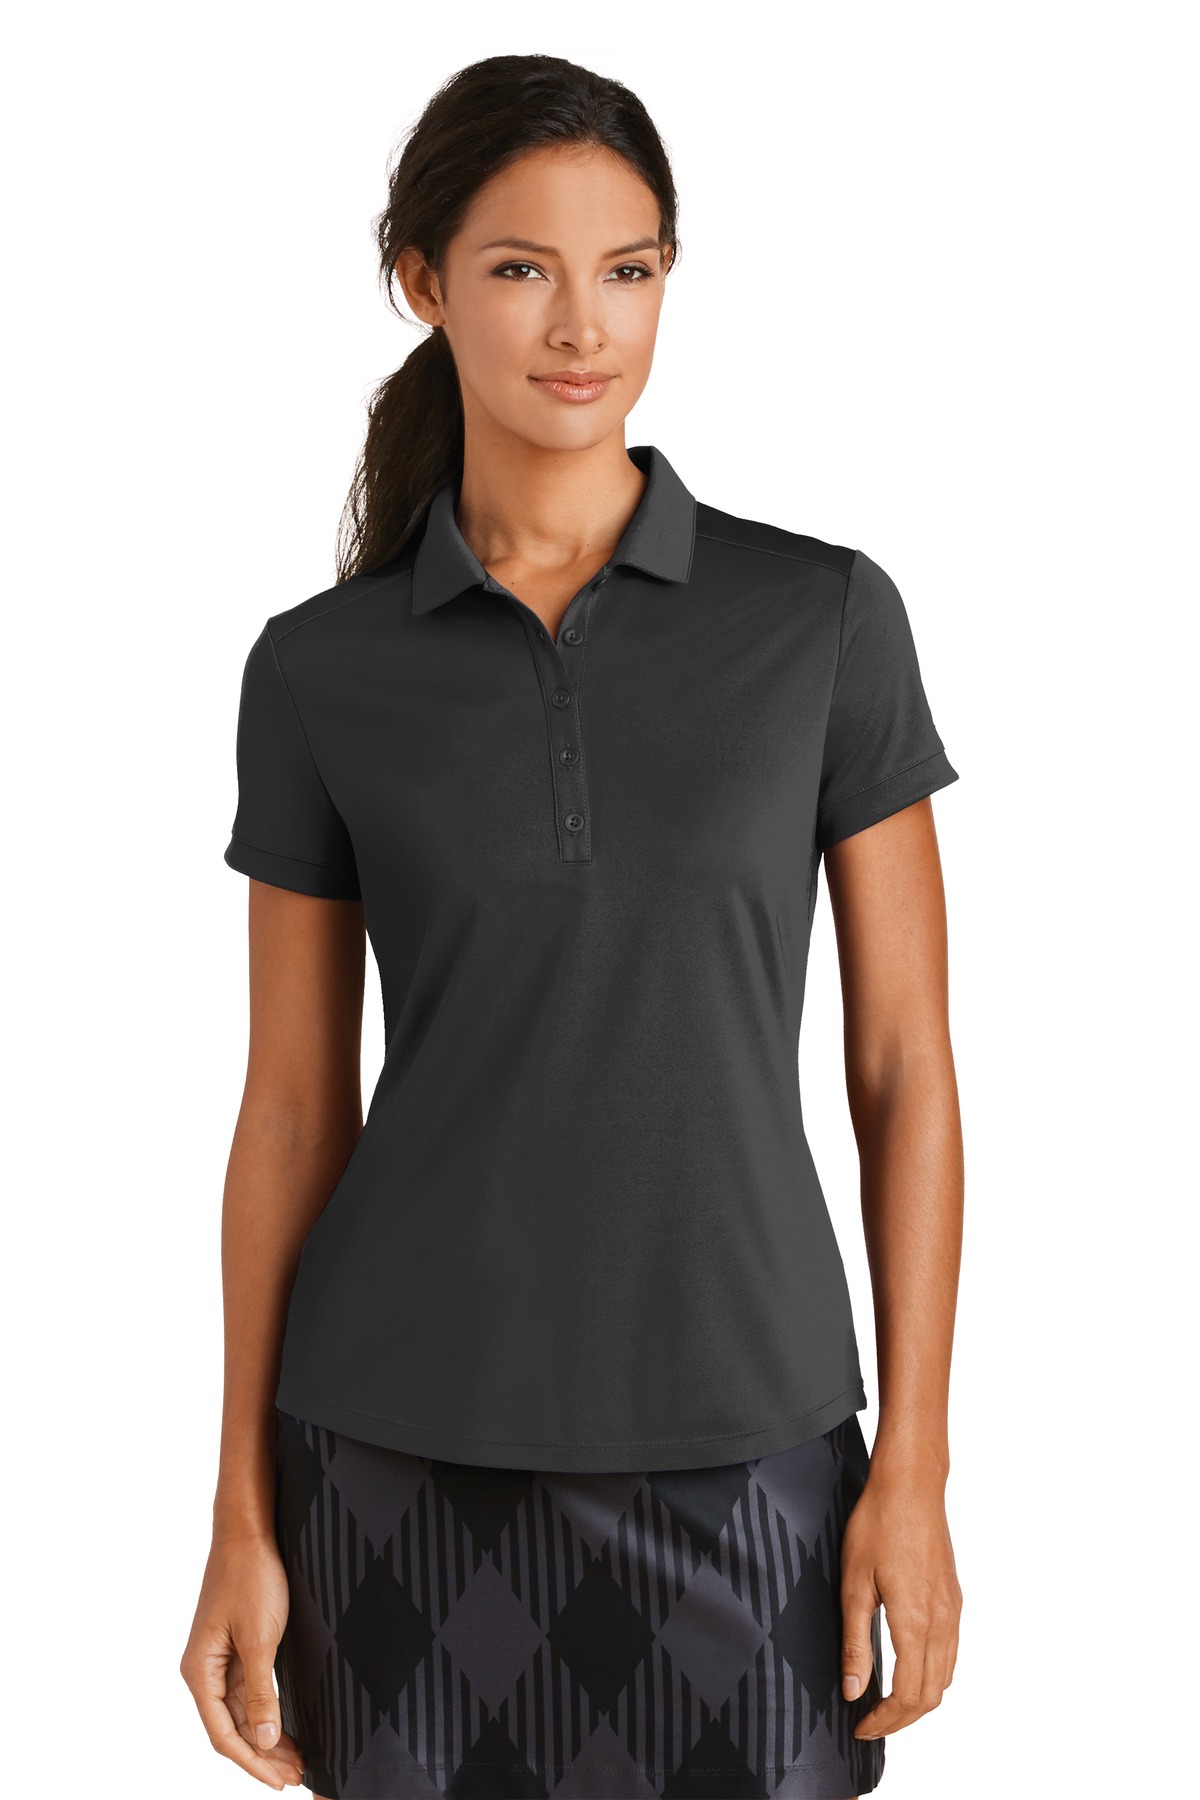 Nike Ladies Polos& Knits for Corporate Hospitality Ladies Dri-FIT Players Modern Fit Polo.-Nike